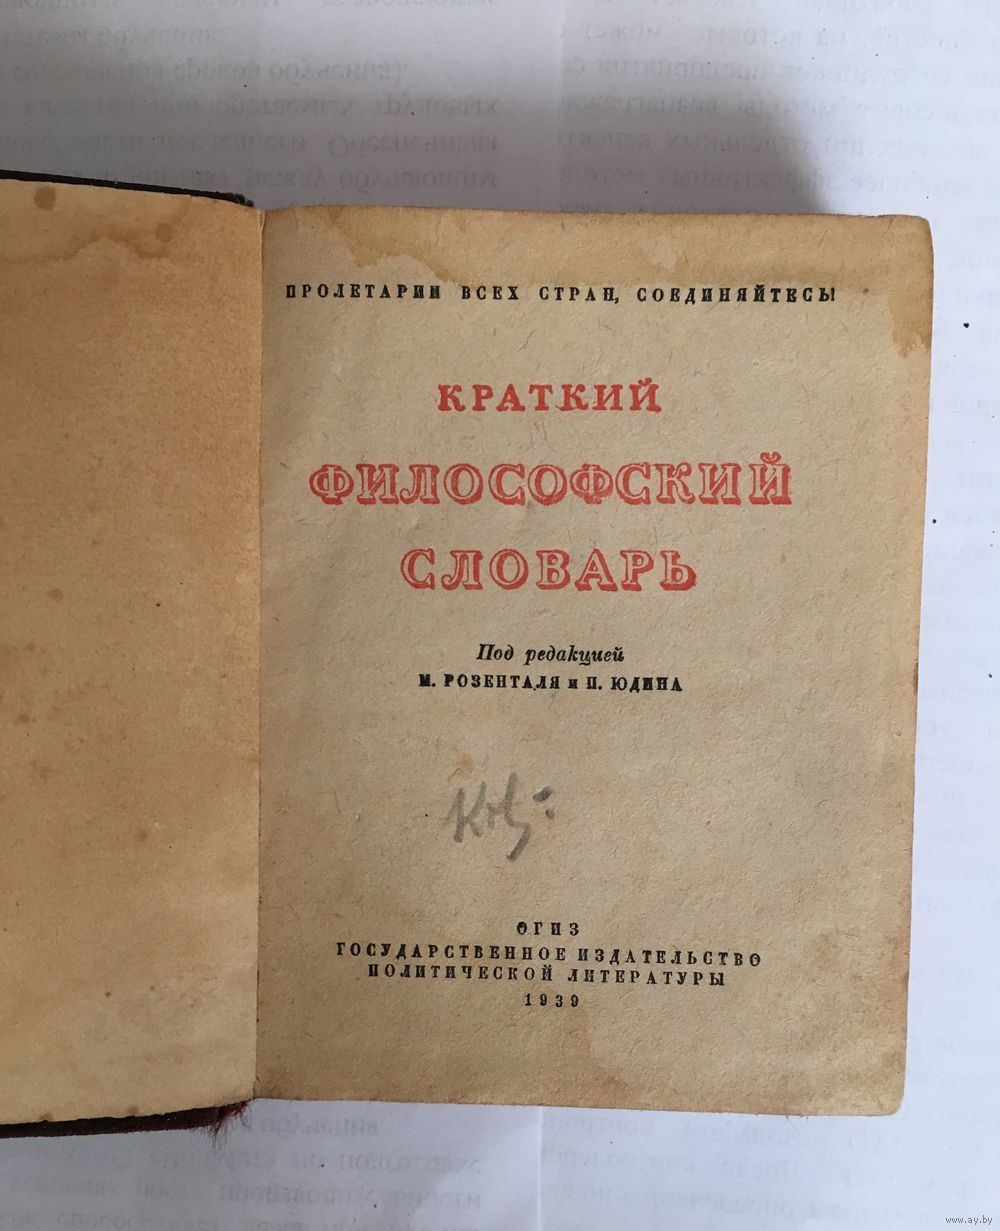 Quotes from Soviet dictionaries: ART - Art, Capitalism, Socialism, Longpost, Dictionary, Quotes